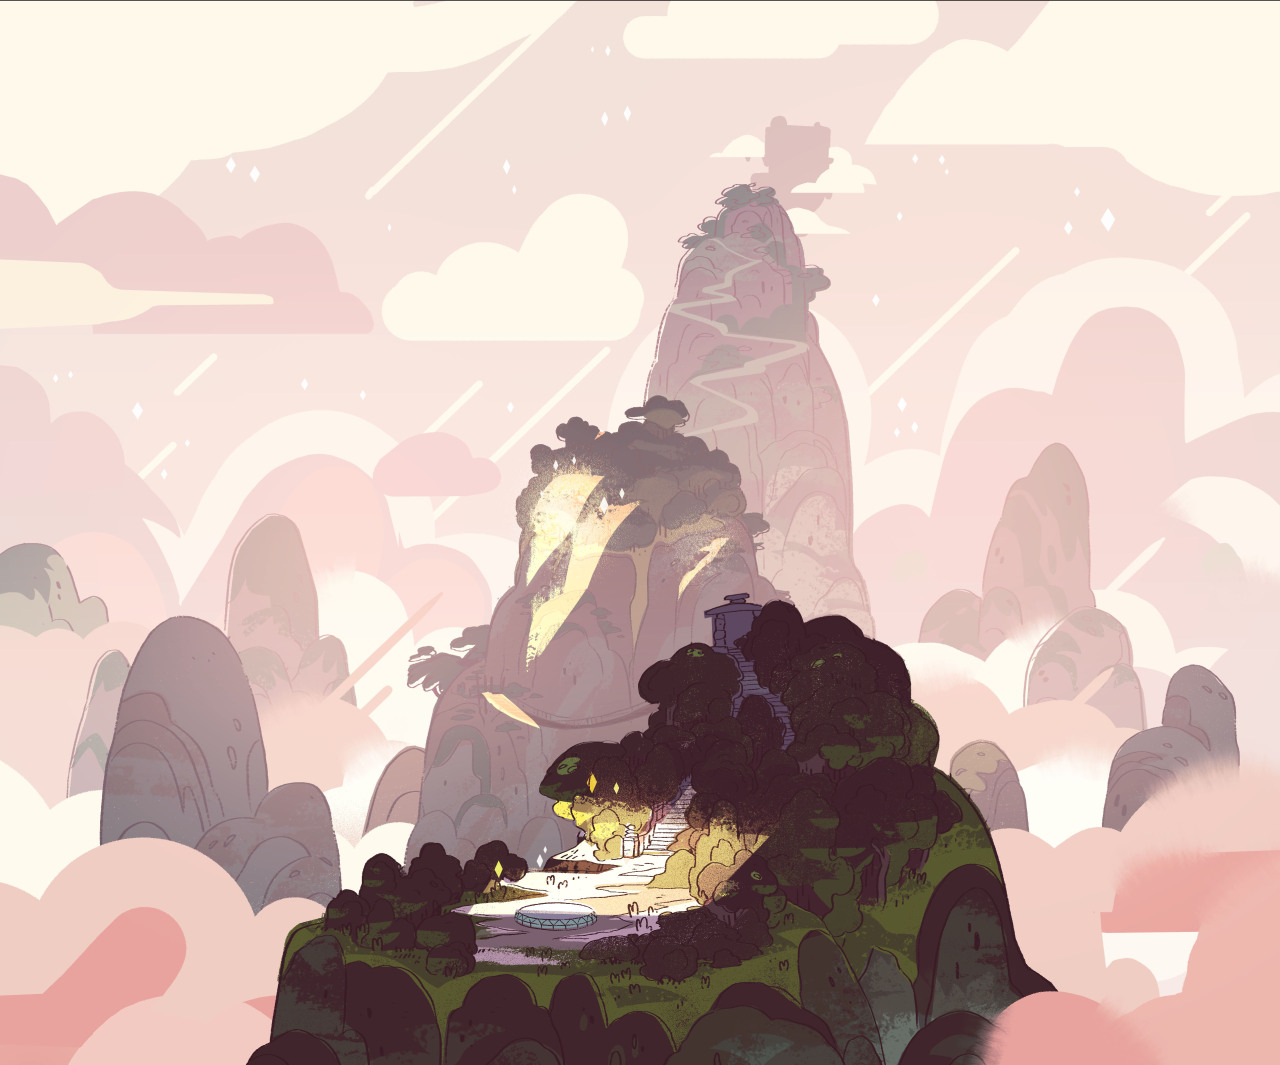 A selection of Backgrounds from the Steven Universe episode: &ldquo;Giant Woman&rdquo;